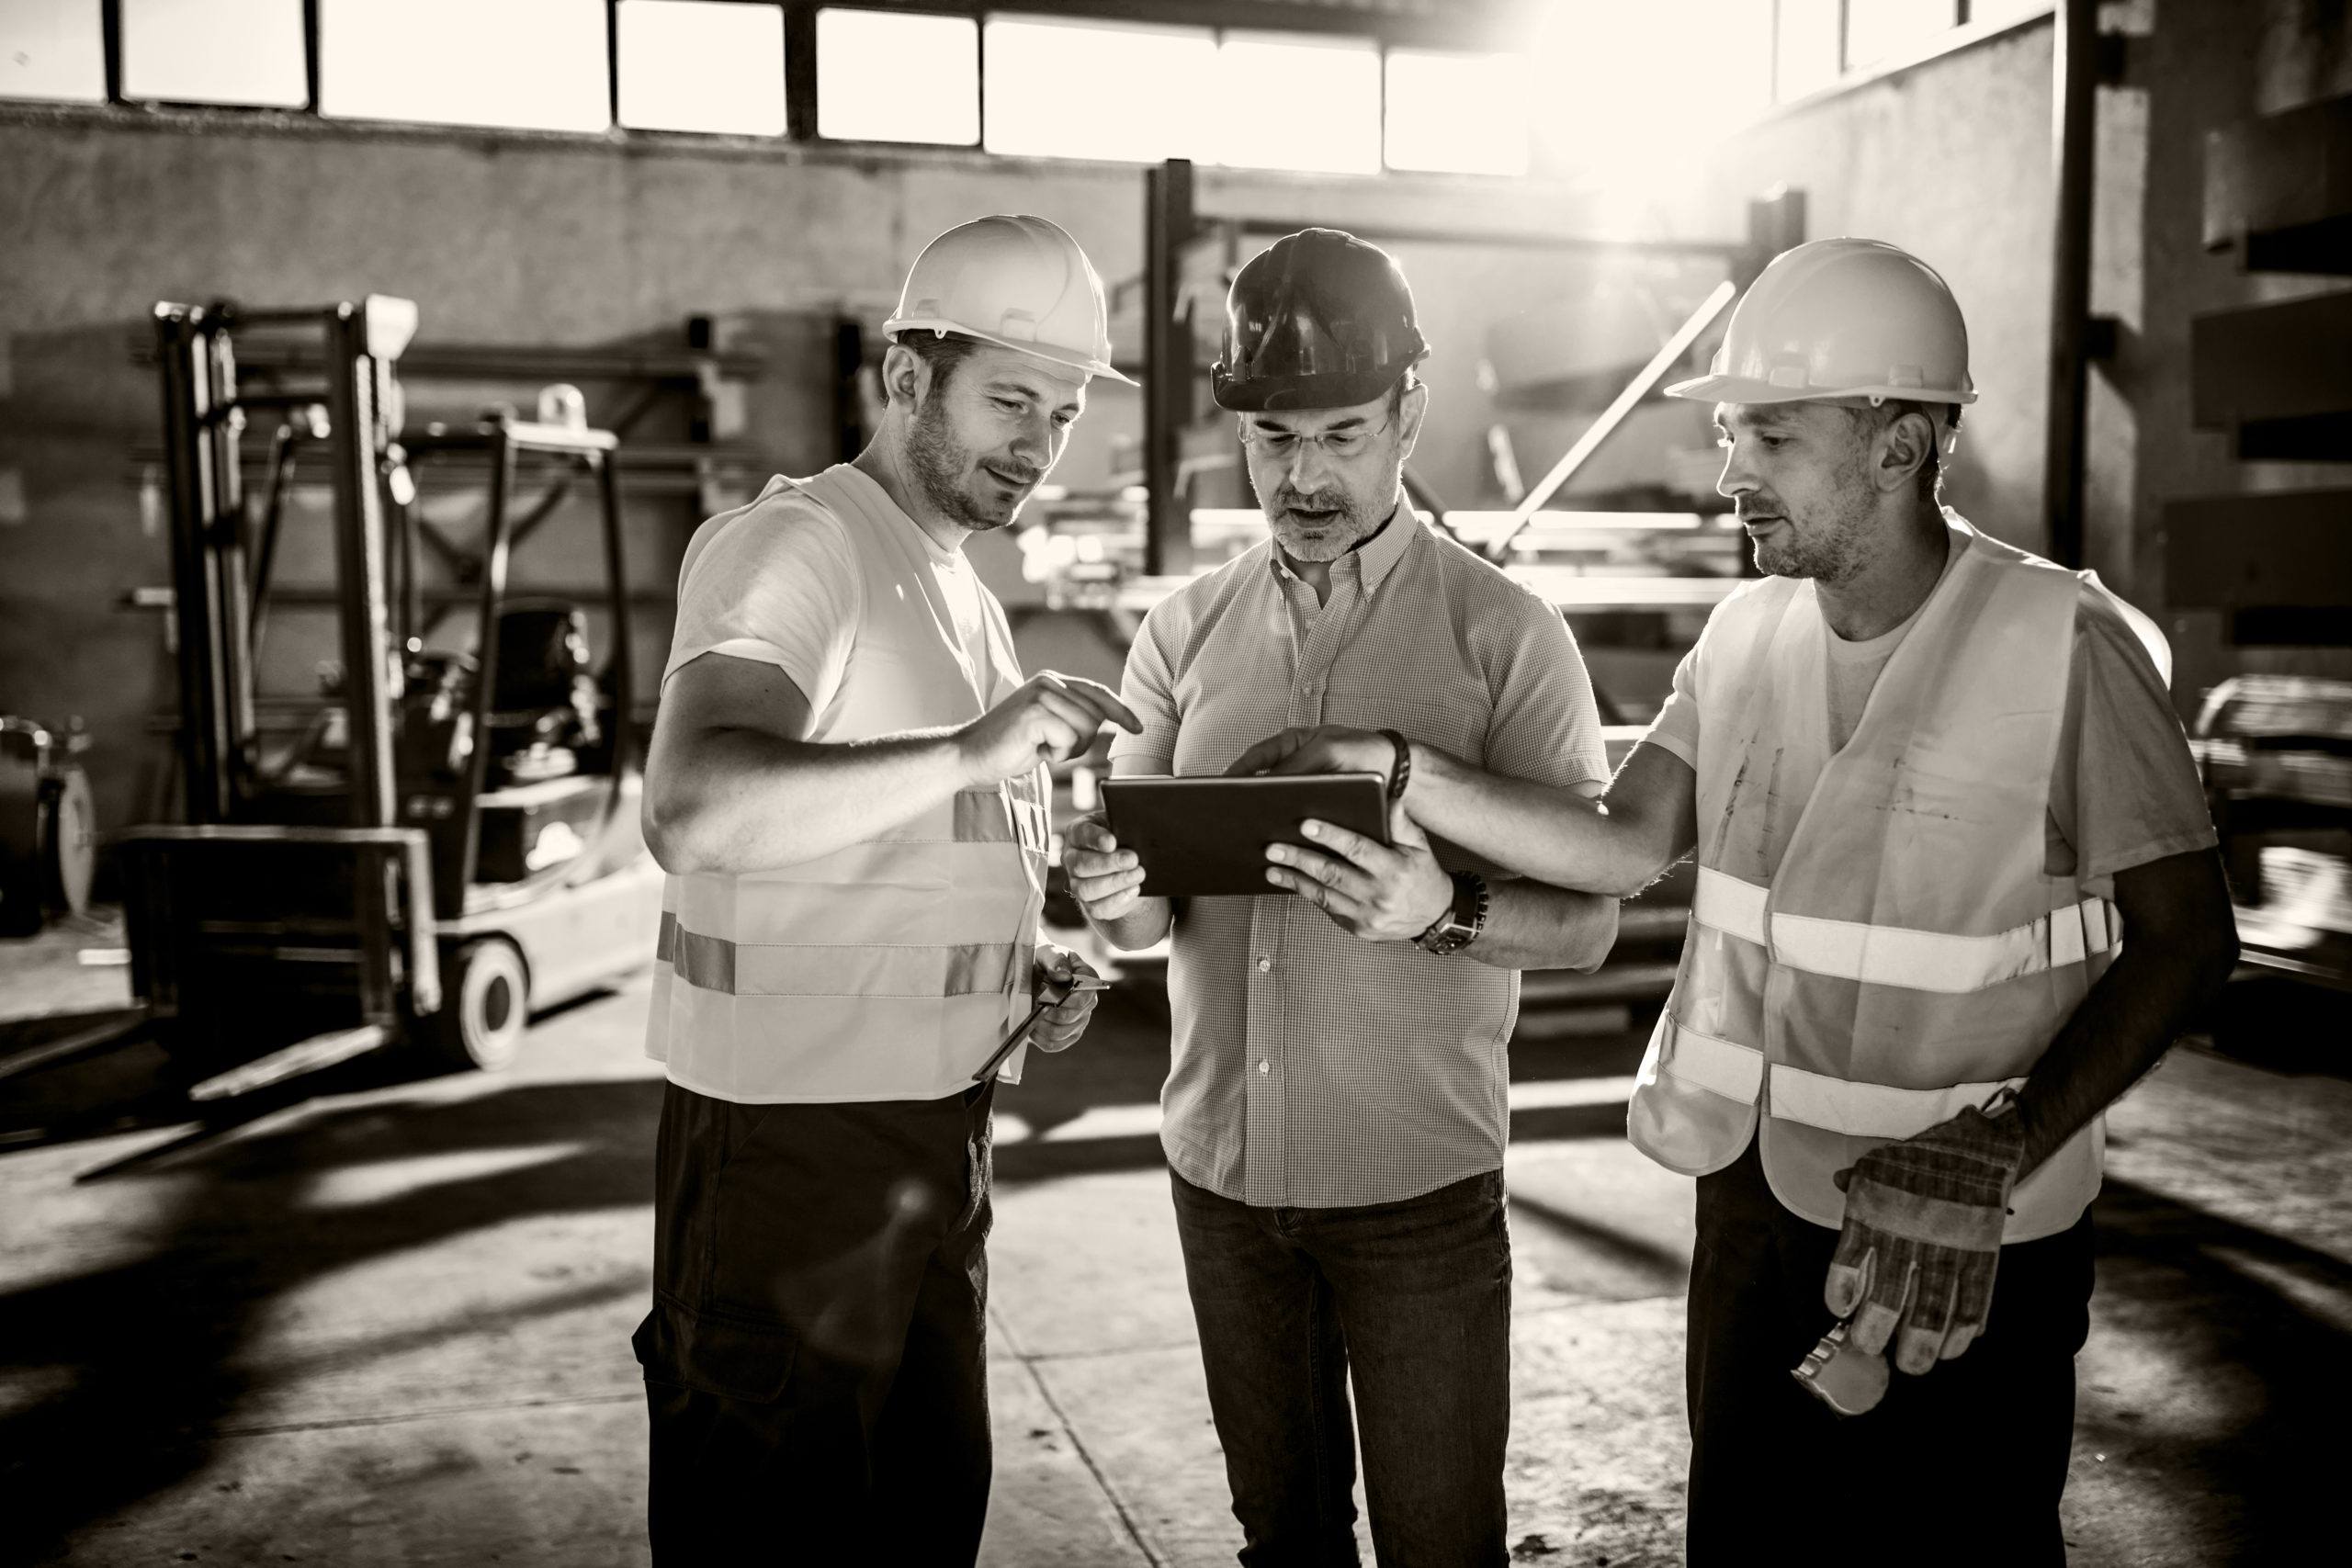 image of 3 men talking with construction gear on